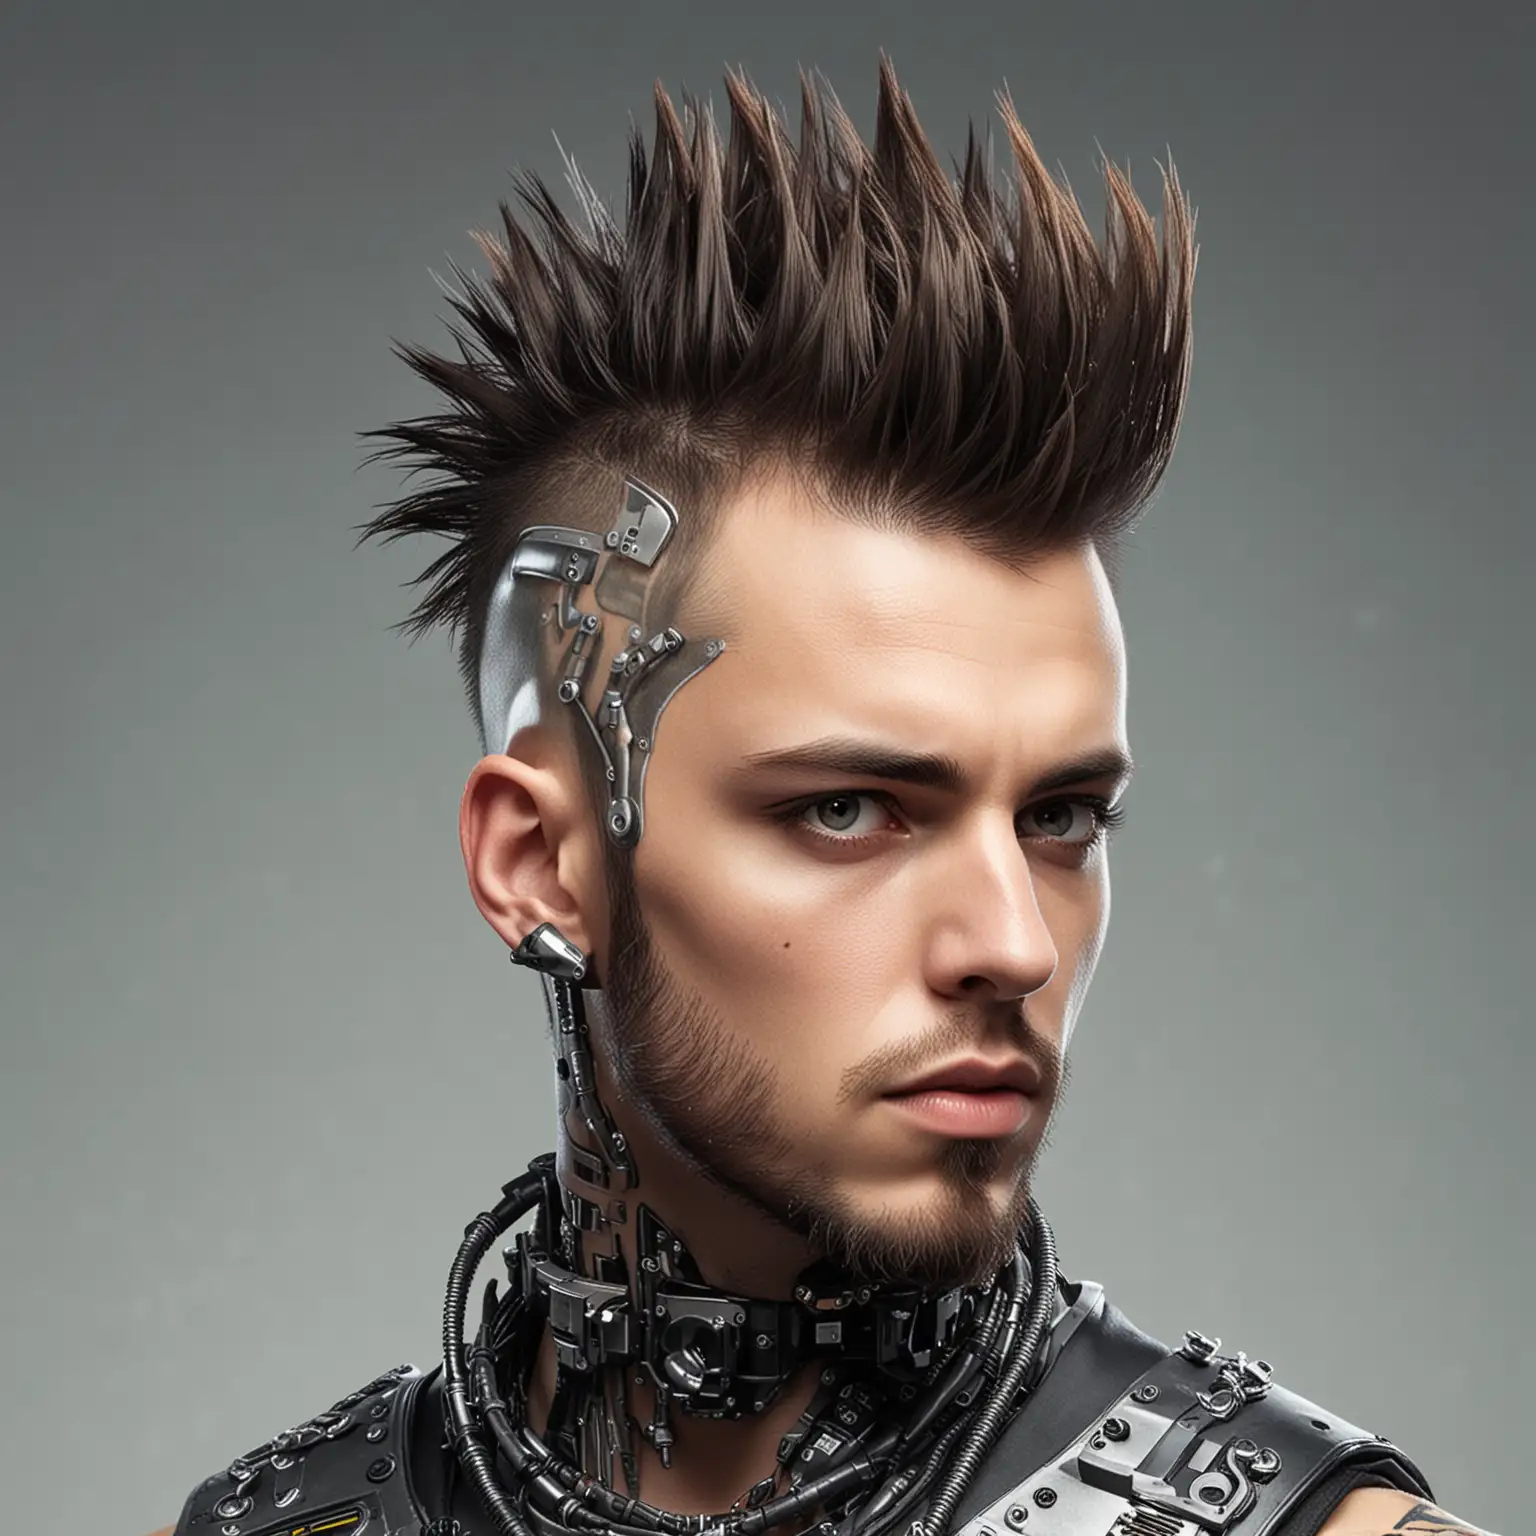 Rebellious Cyborg with Punk Style and Beard